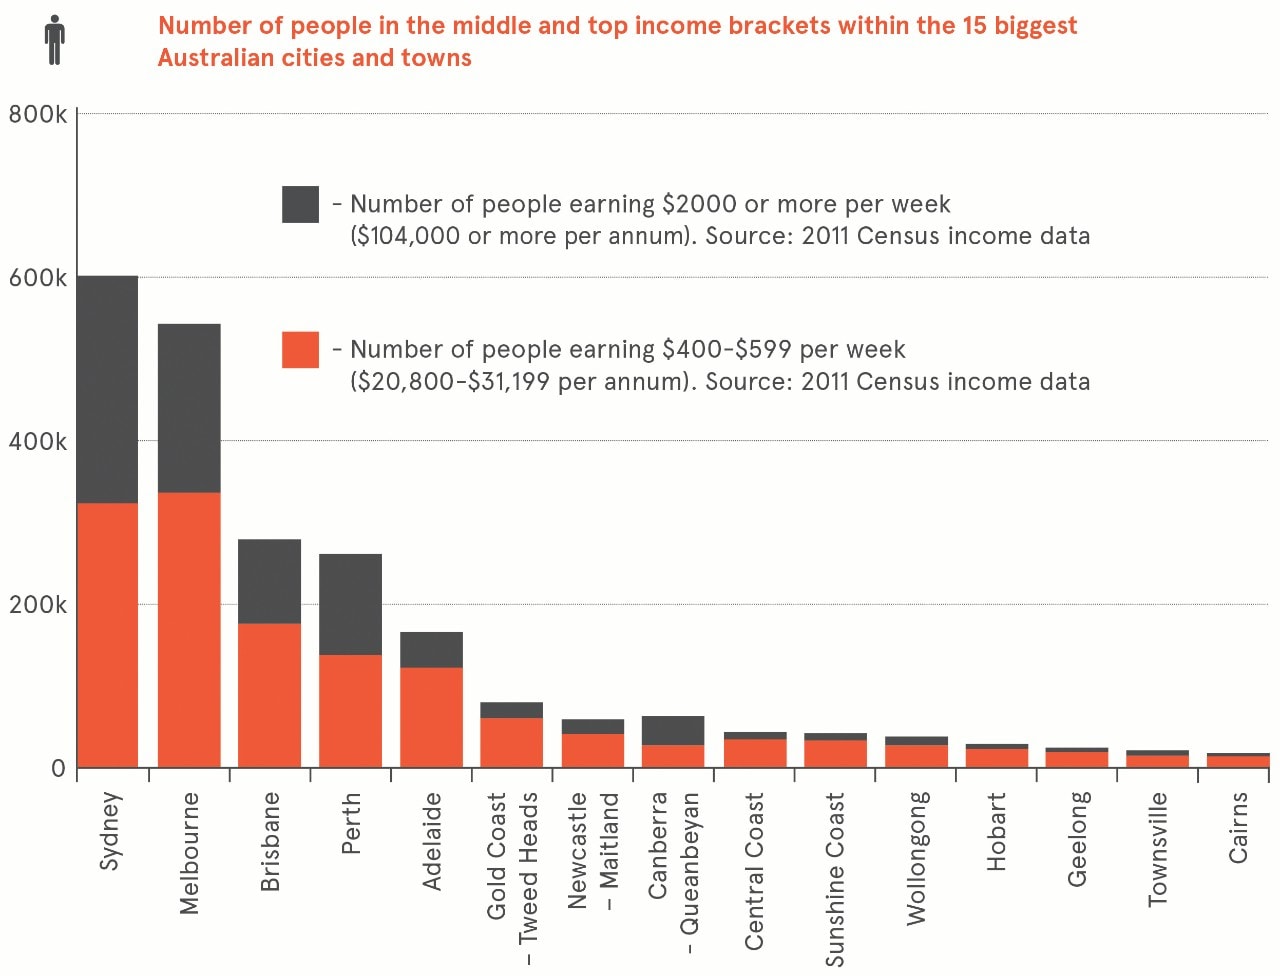 Bar graph showing number of people in the middle and top income brackets in the 15 biggest Australian cities and towns